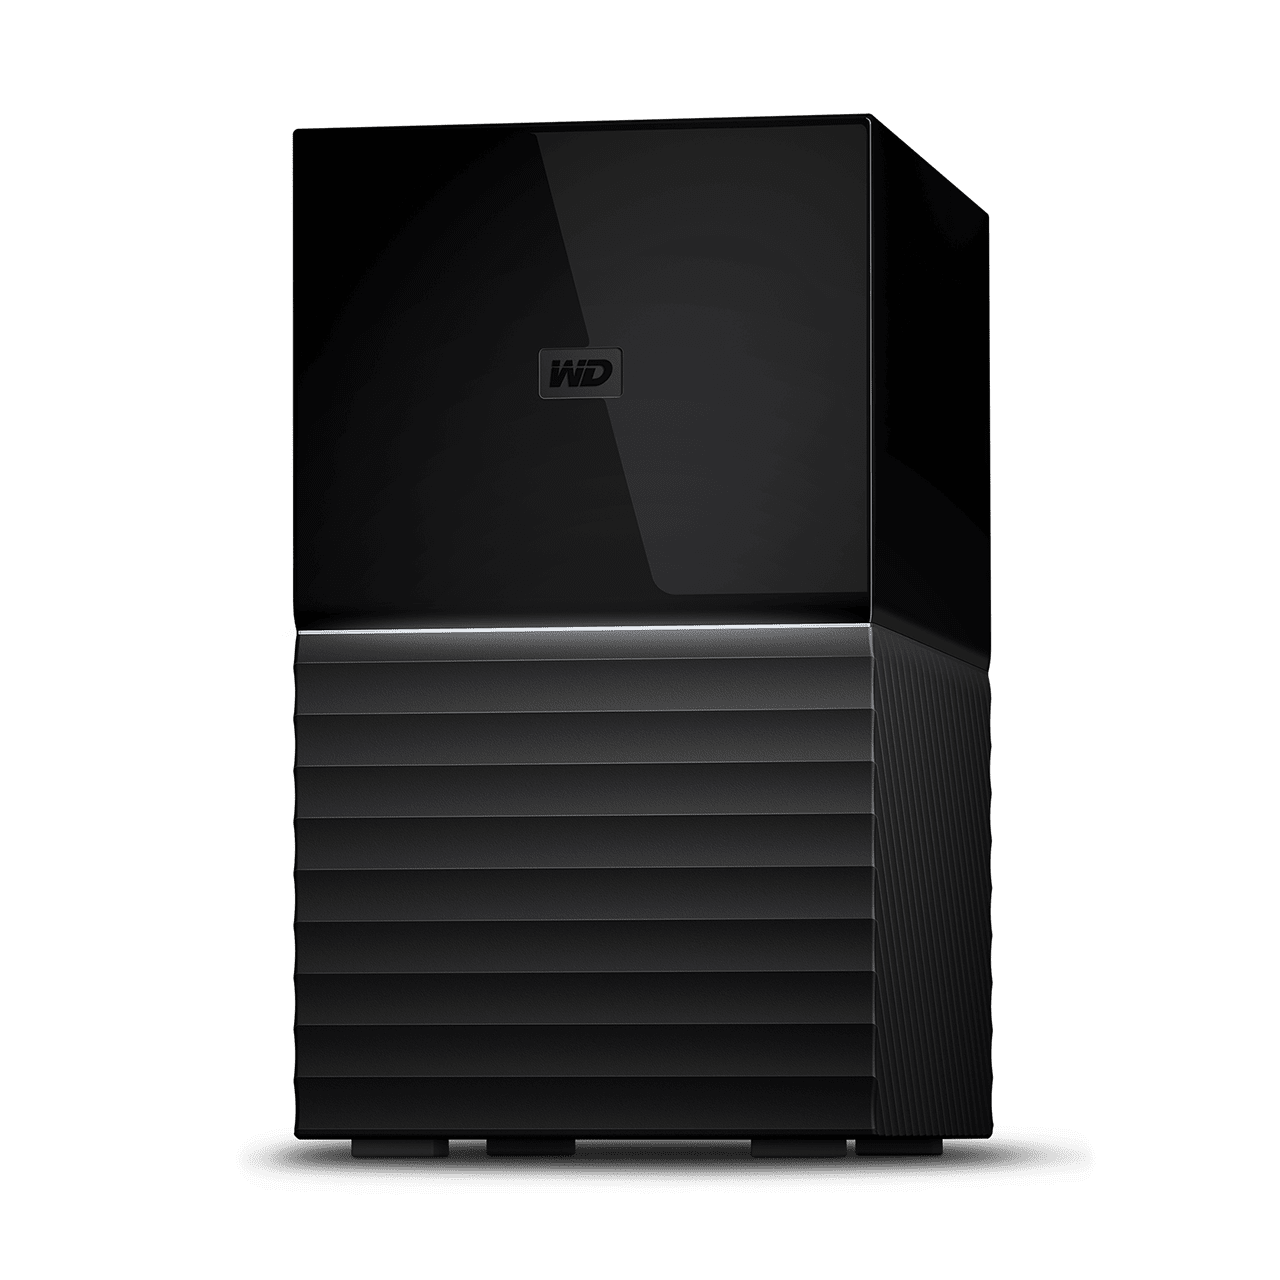 WD My Book Duo 4TB